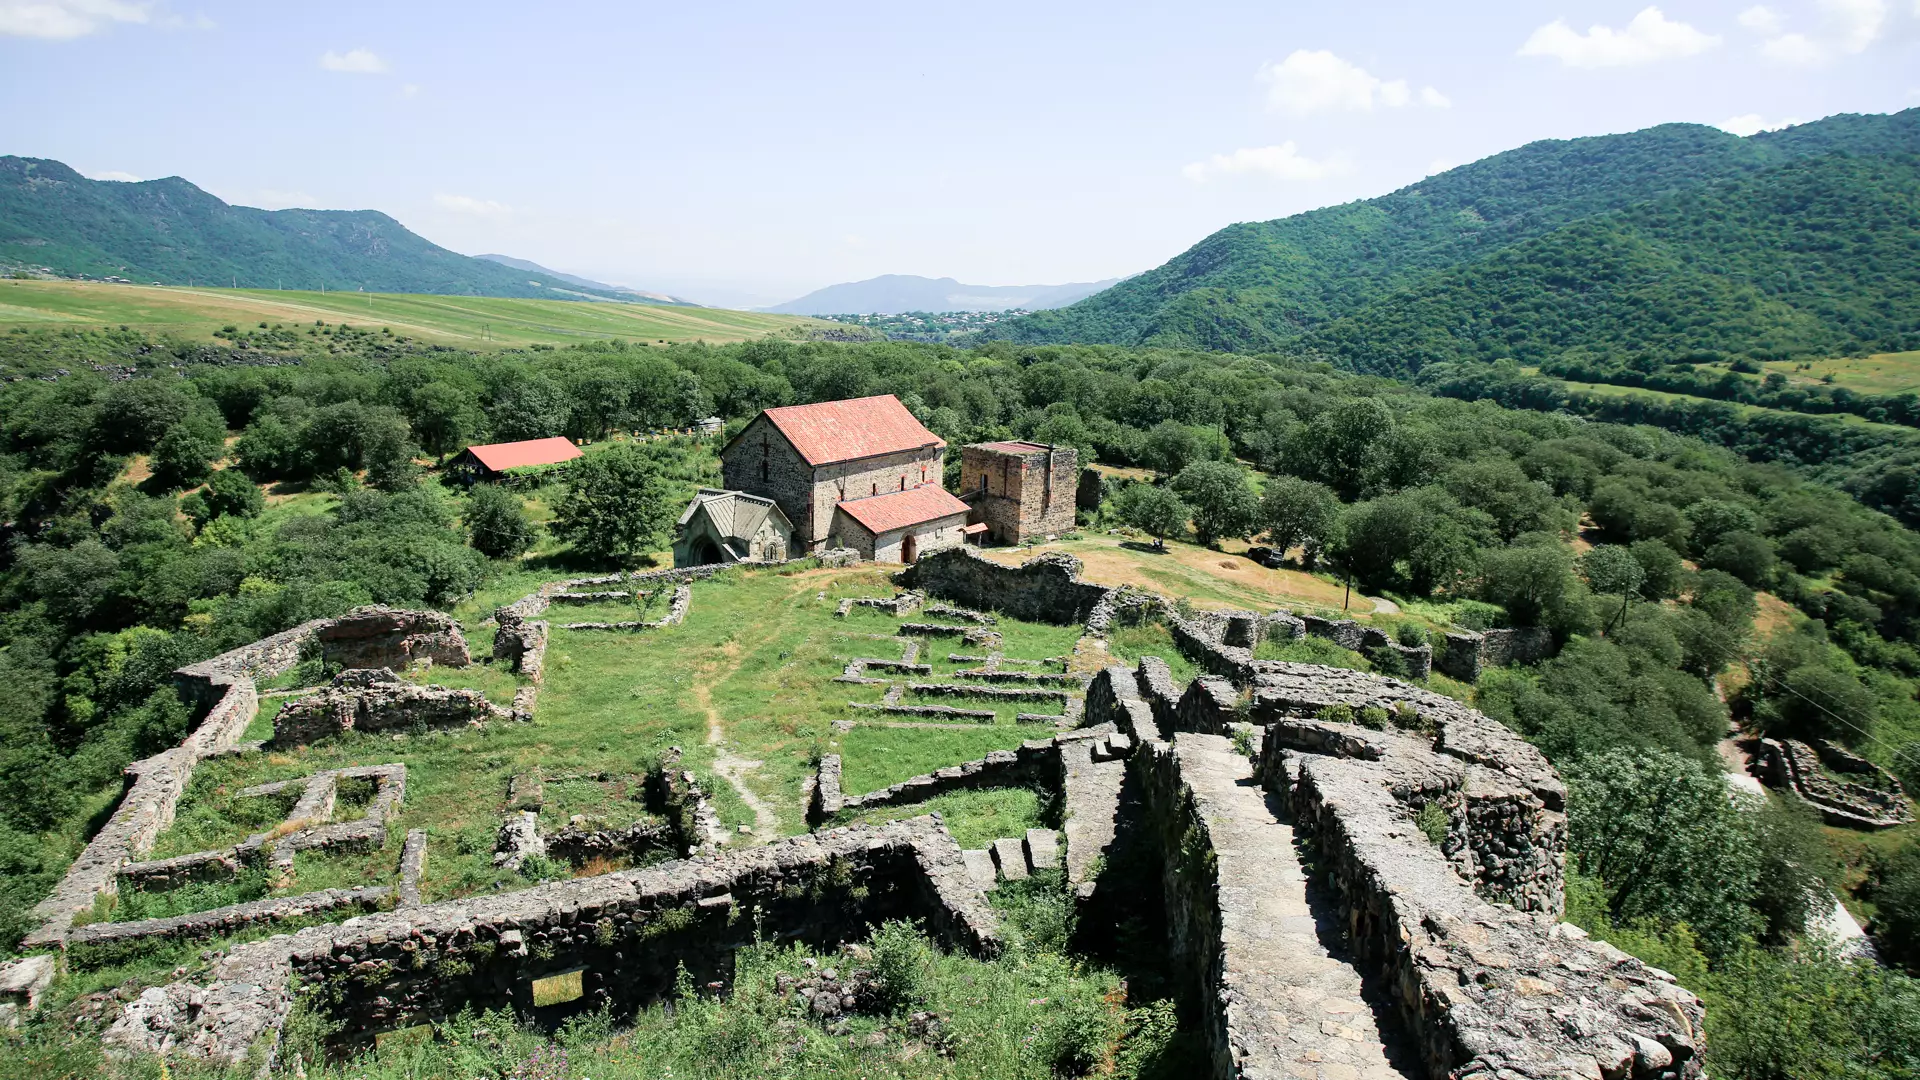 Dmanisi - Home to the First Europeans